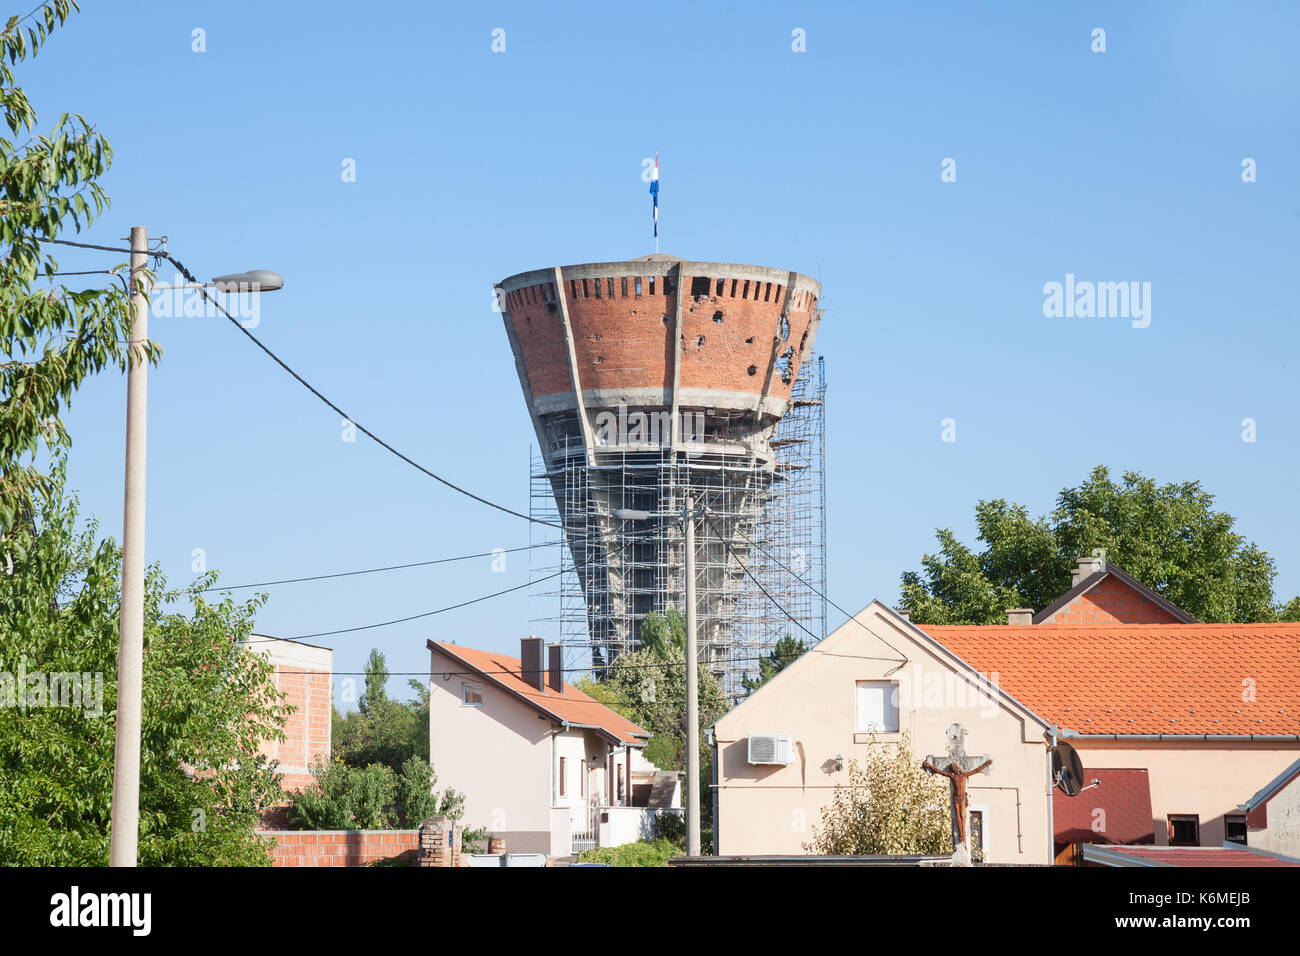 VUKOVAR, CROATIA - AUGUST 25, 2017: Water tower from Vukovar, with bullet and missile holes from the 1991-1995 conflict, which opposed Serbian to Croa Stock Photo